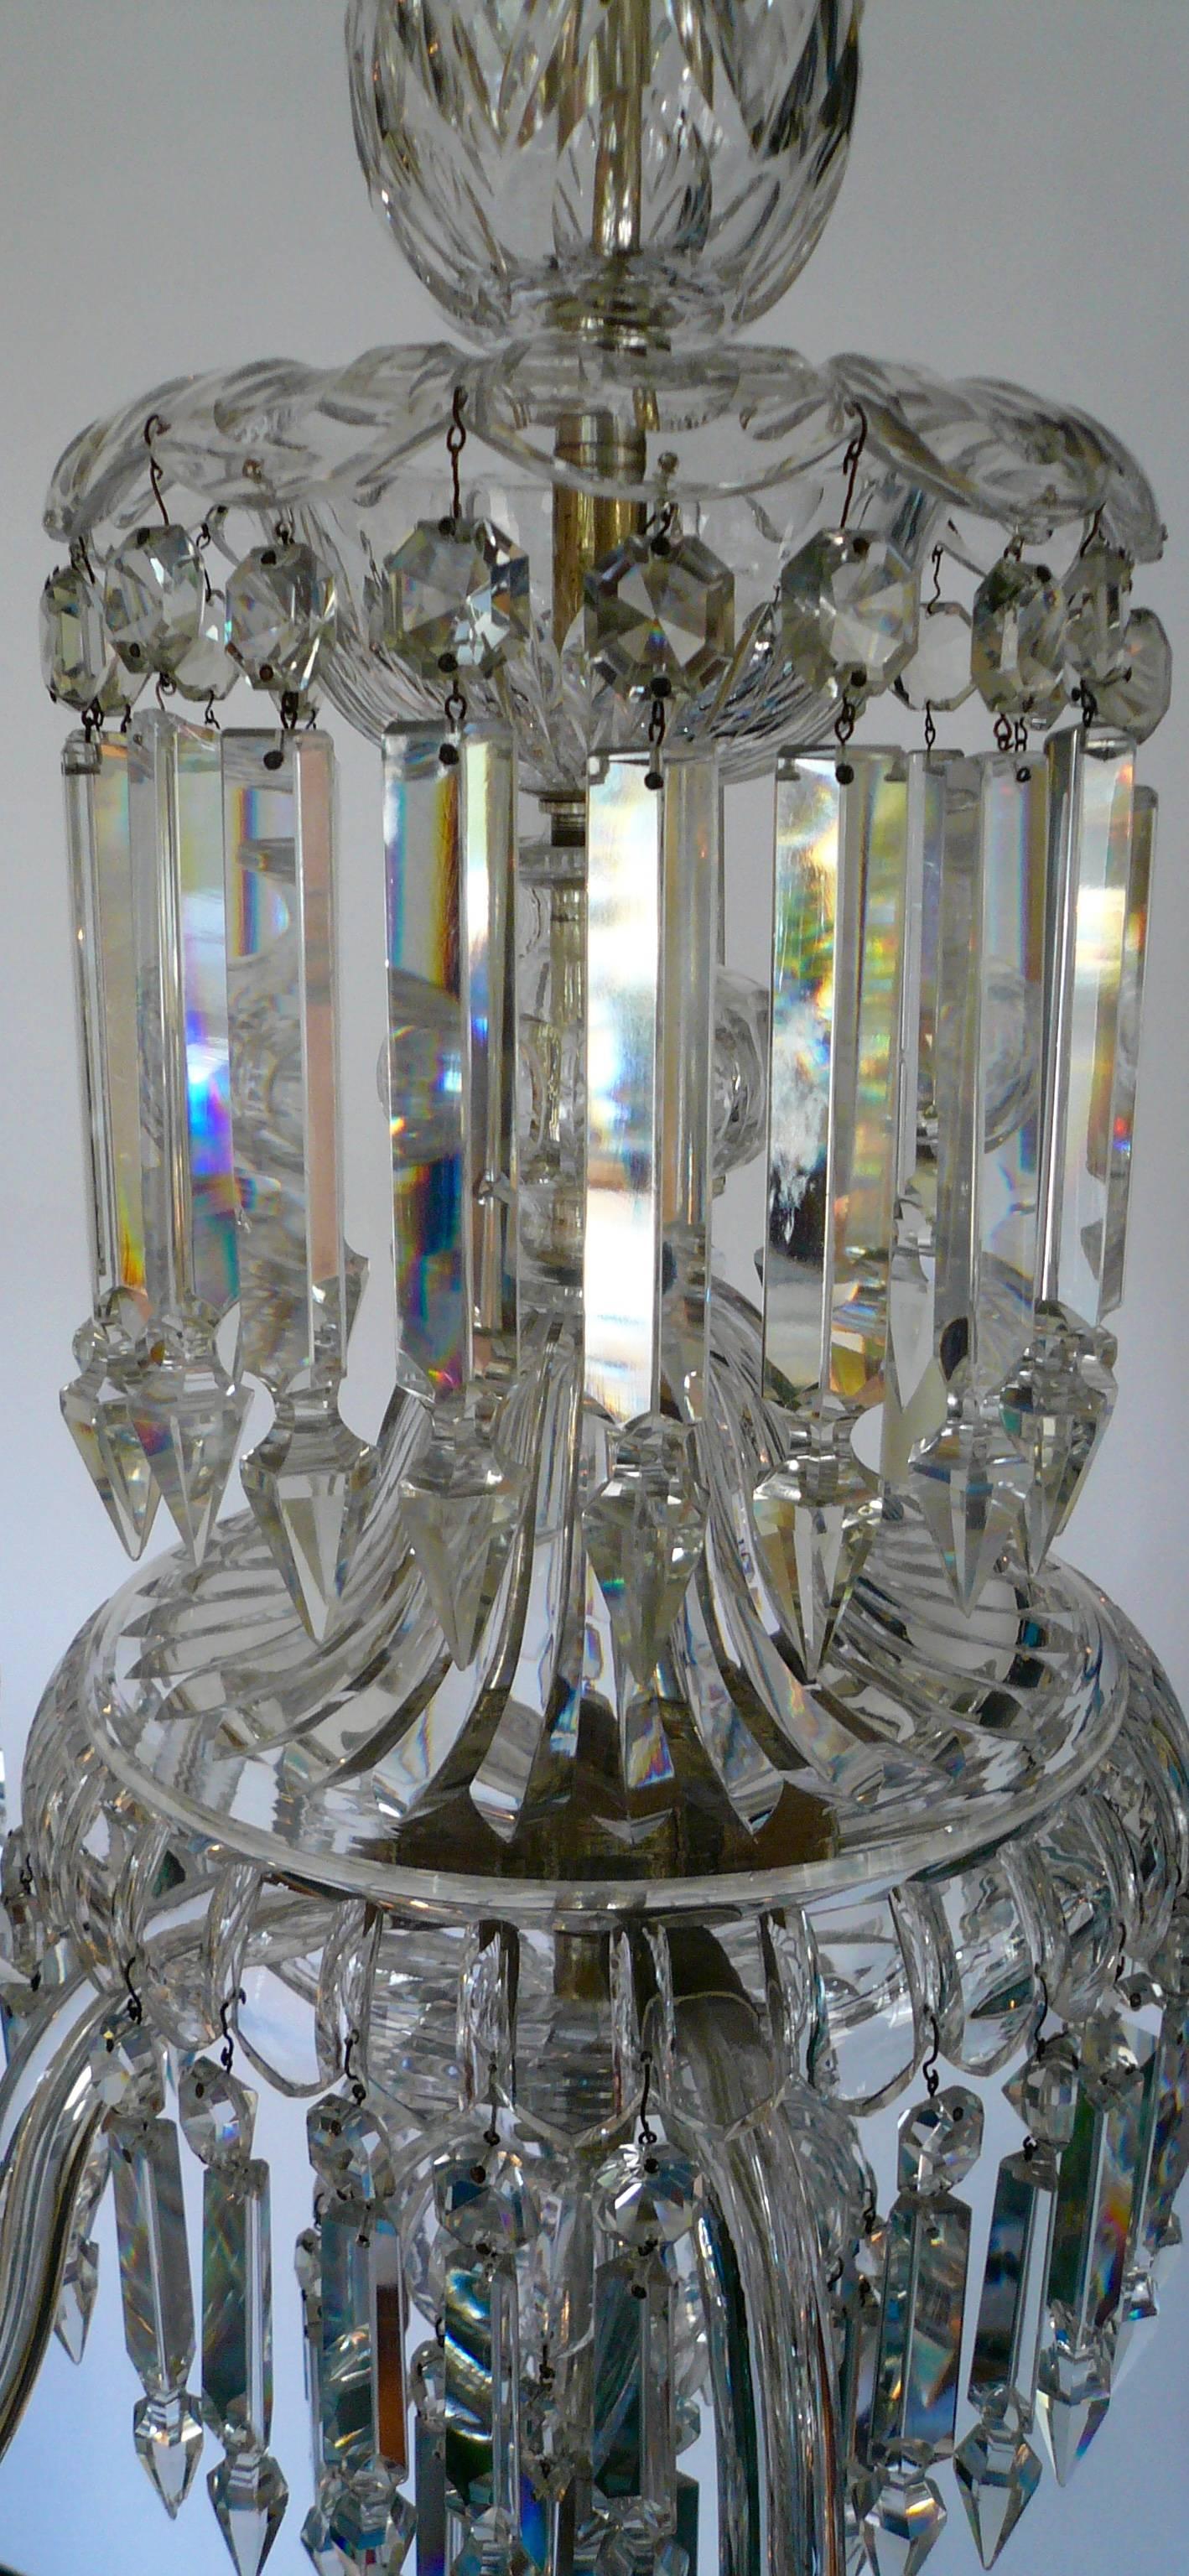 Early Victorian 19th Century English Cut Crystal Chandelier by Renowned Maker F&C Osler